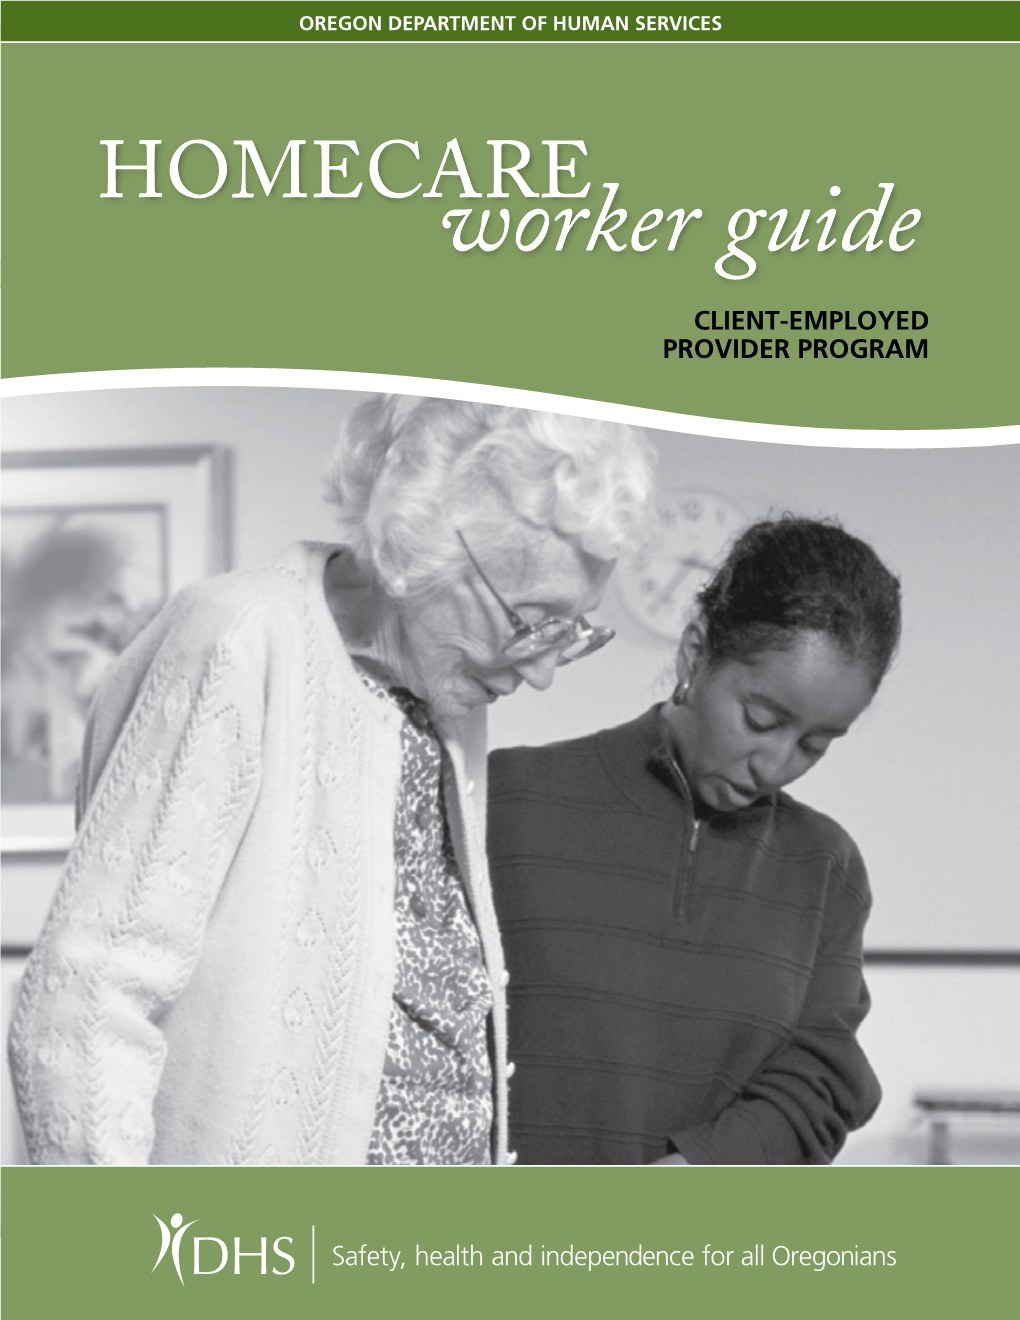 Homecare Worker Guide Client-Employed